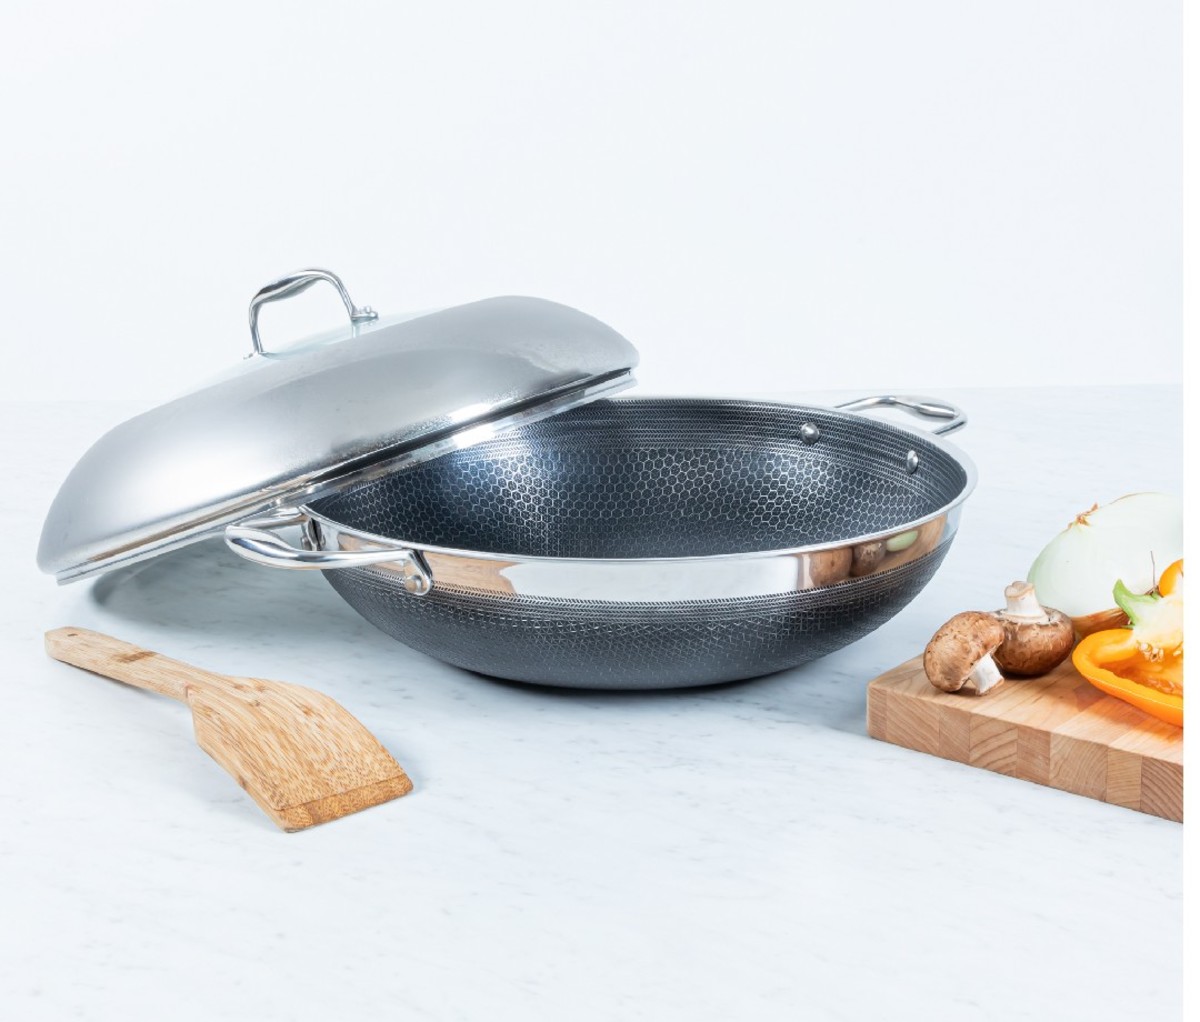 HexClad 14 Hybrid Wok With Lid - Silver - 233 requests